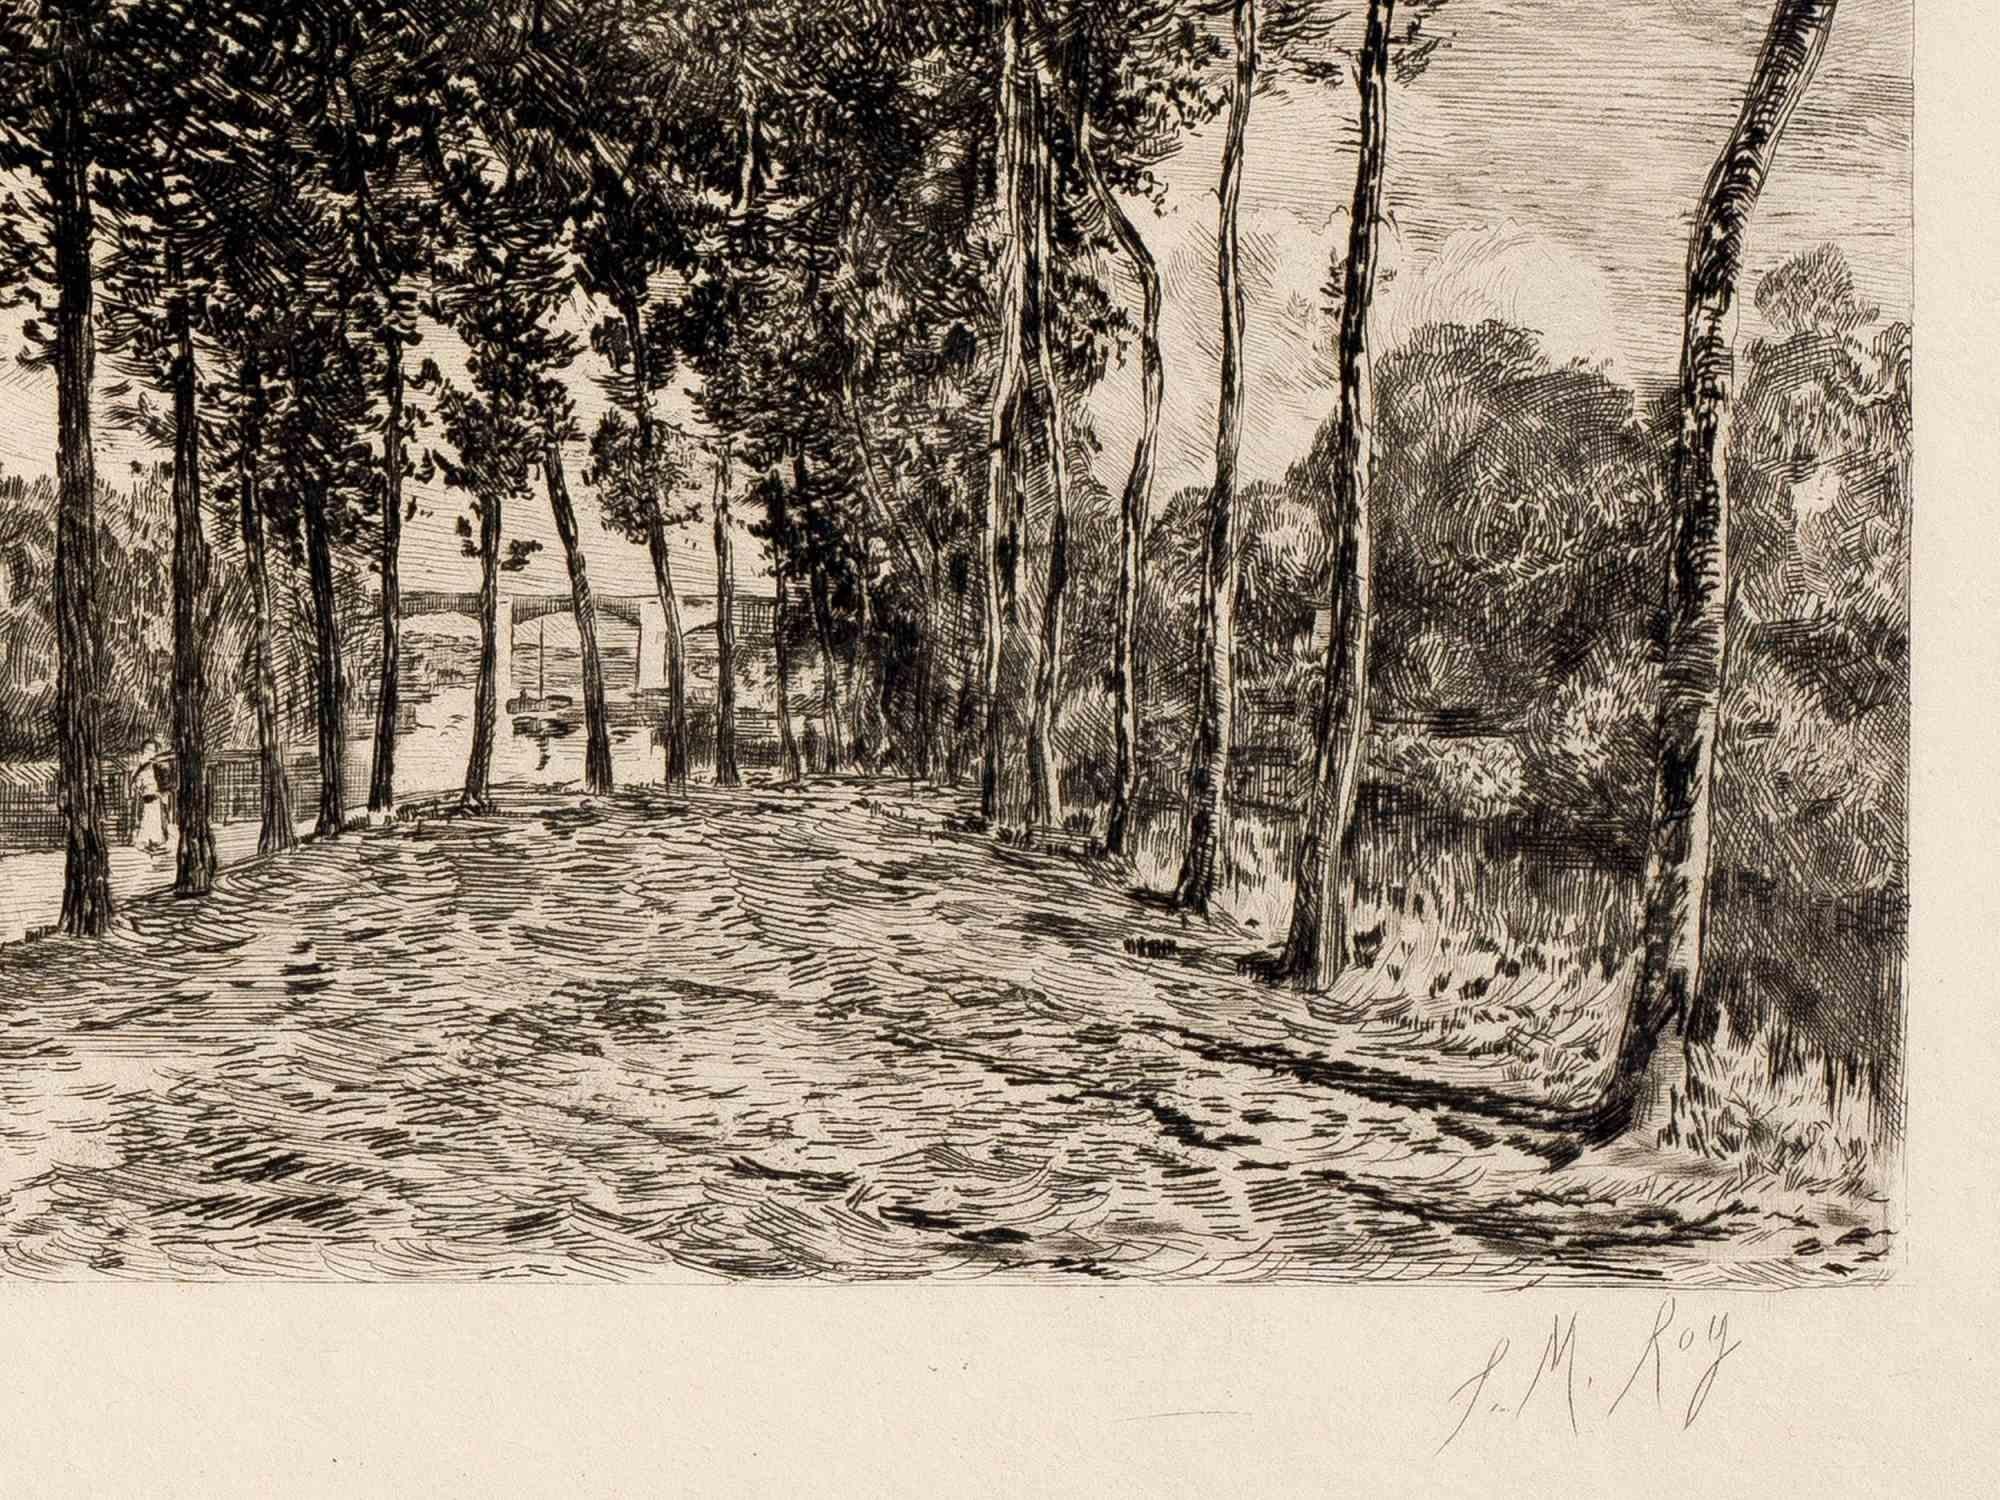 Landscape is an old master artwork realized in 19th Century after Alfred Sisley.

The artwork was realized after an original painting by Alfred Sisley

Black and white etching engraved by Pierre Marcel Roy.

Image dimensions: 14 x 18 cm